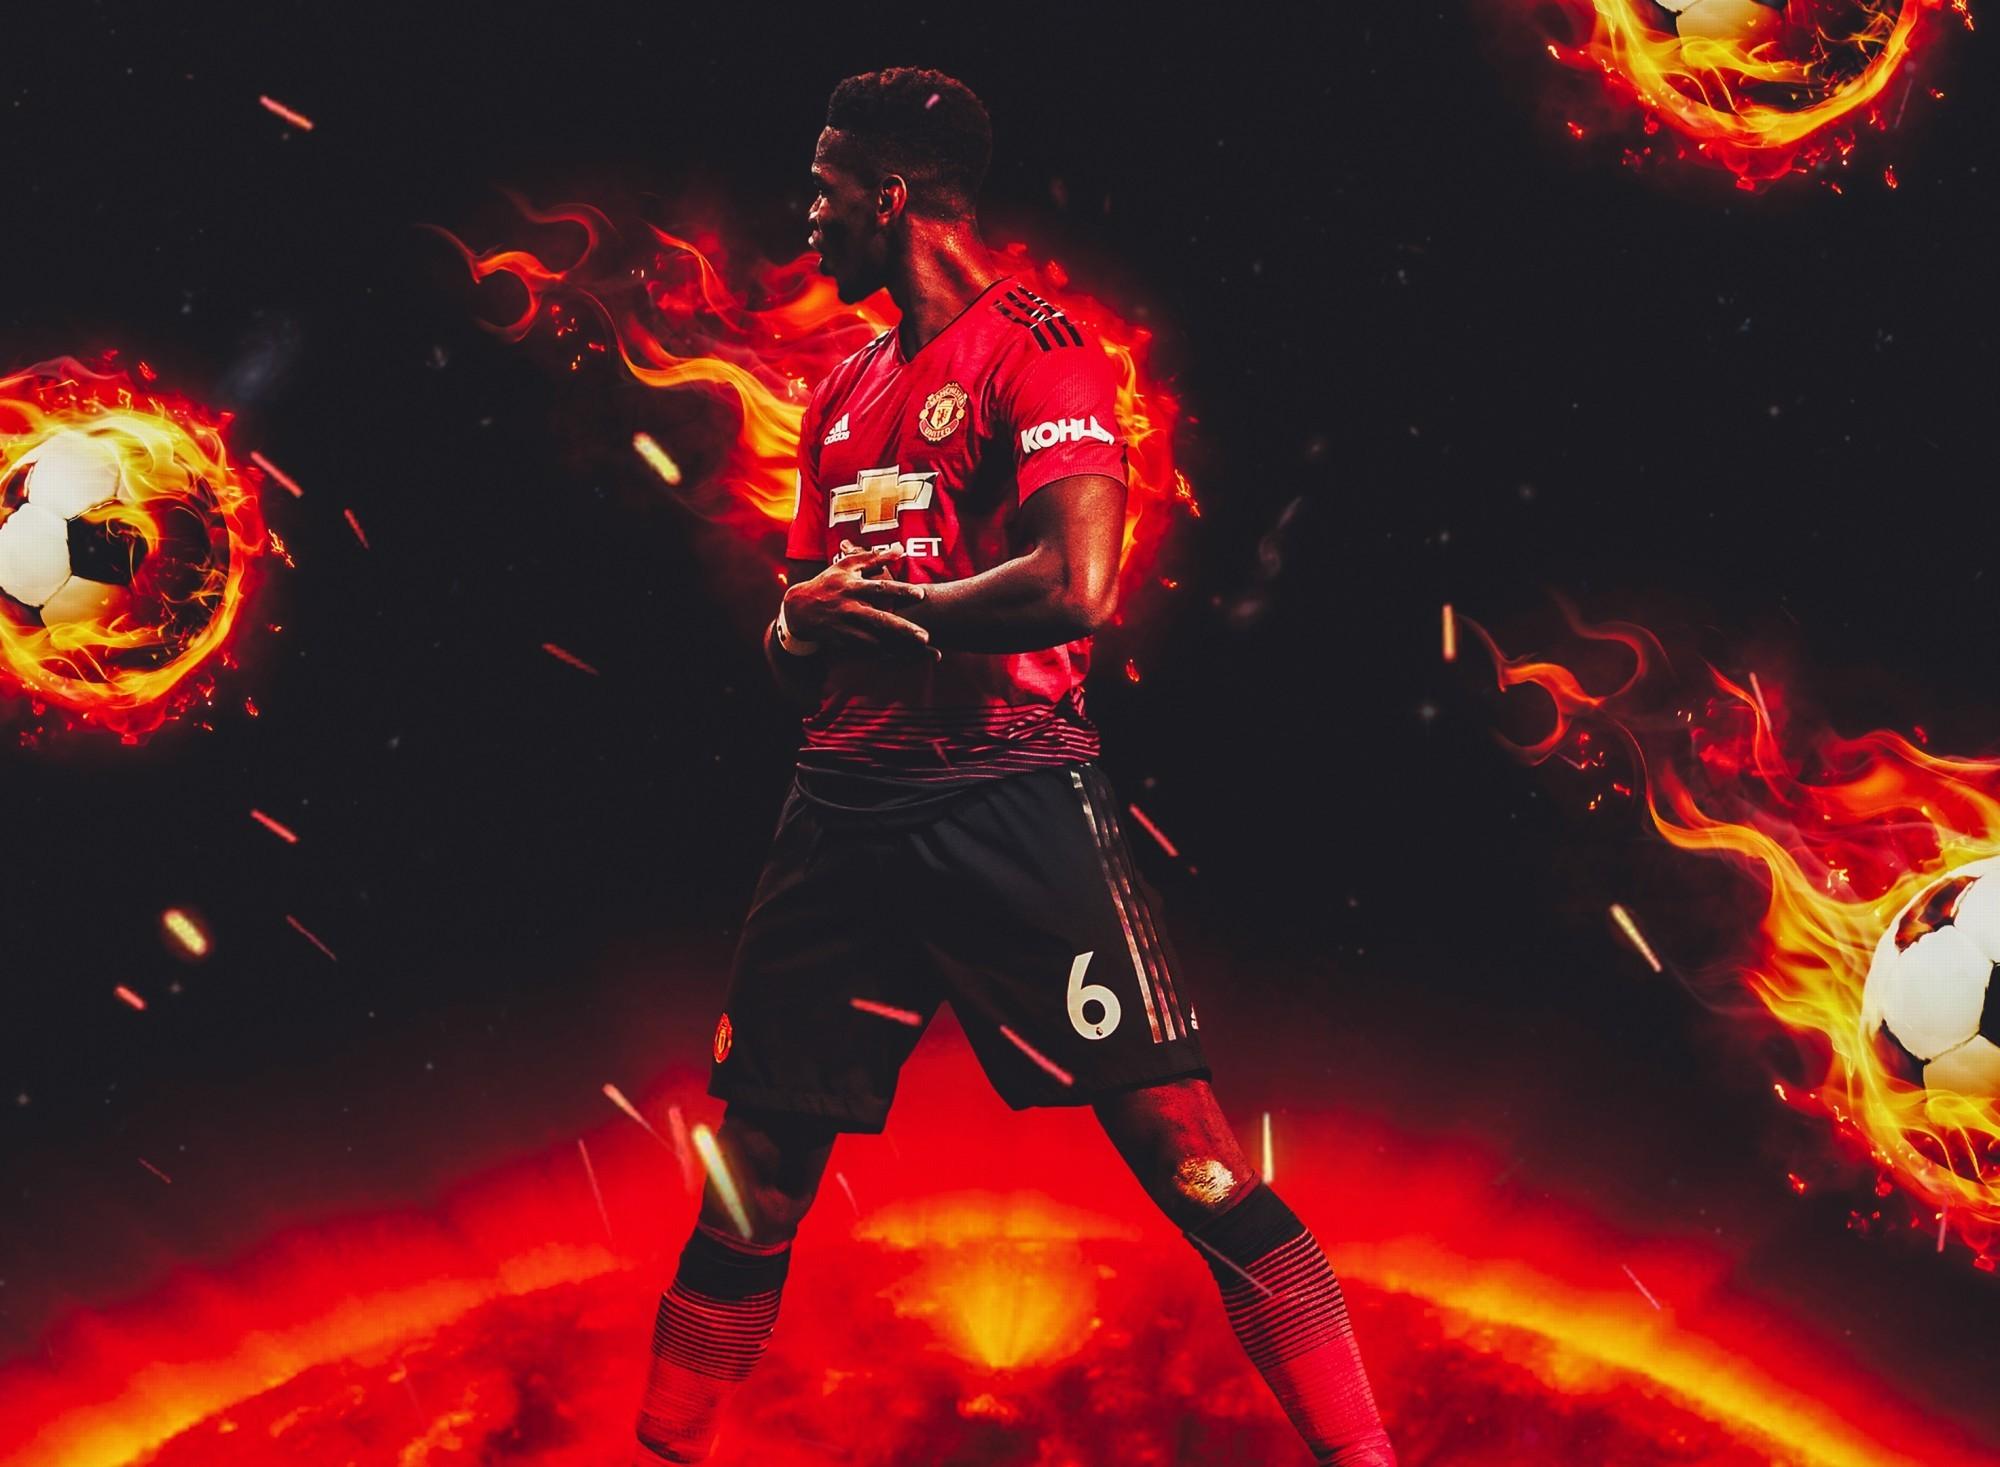 Download 2000x1467 Paul Pogba, Football Player, Manchester United